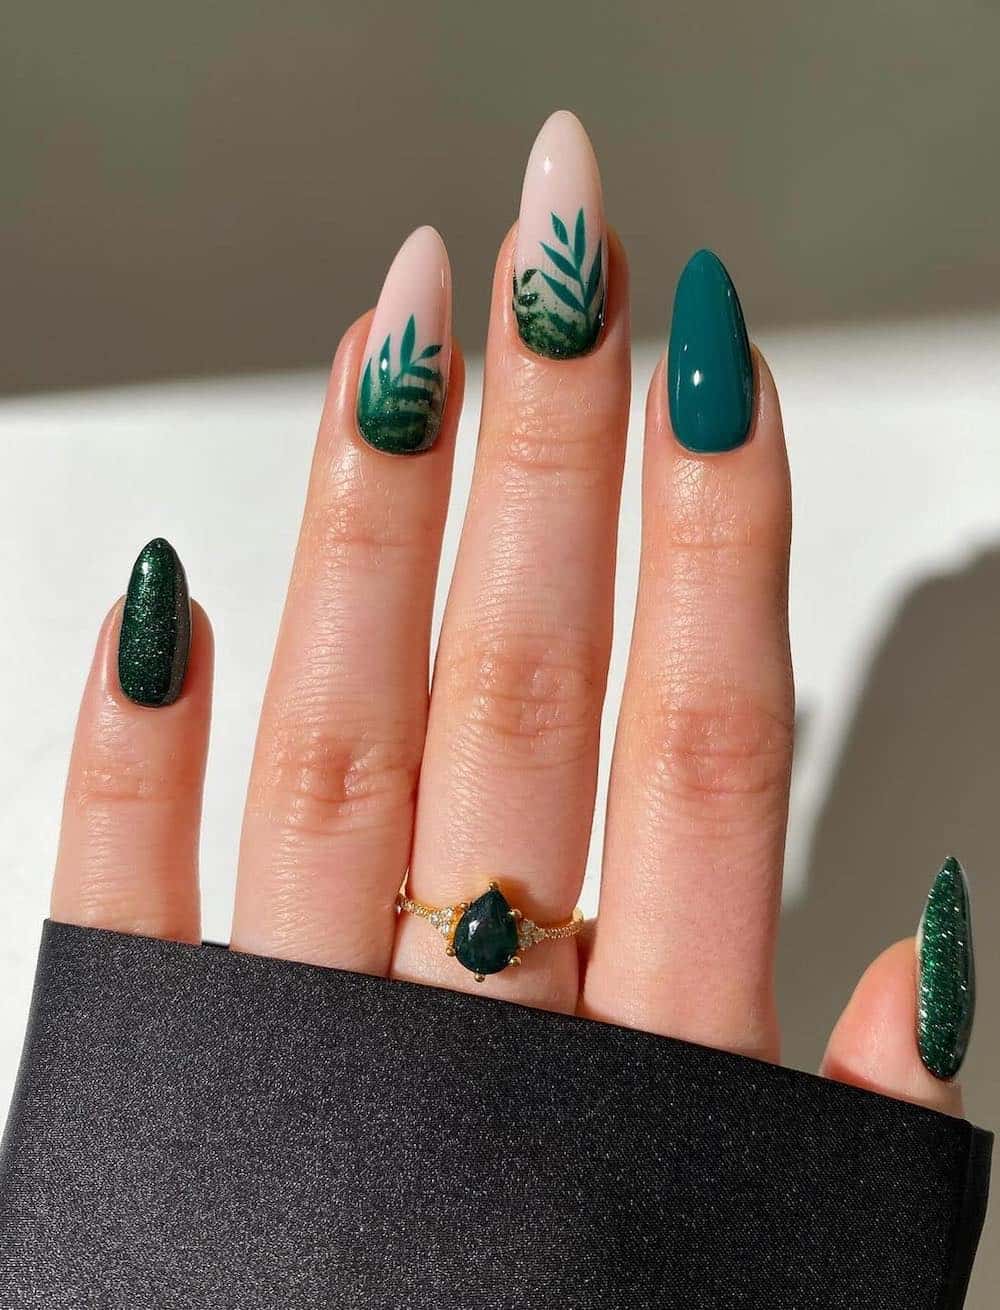 long forest green almond nails with milky nude accent nails featuring botanical art and glitter accent nails